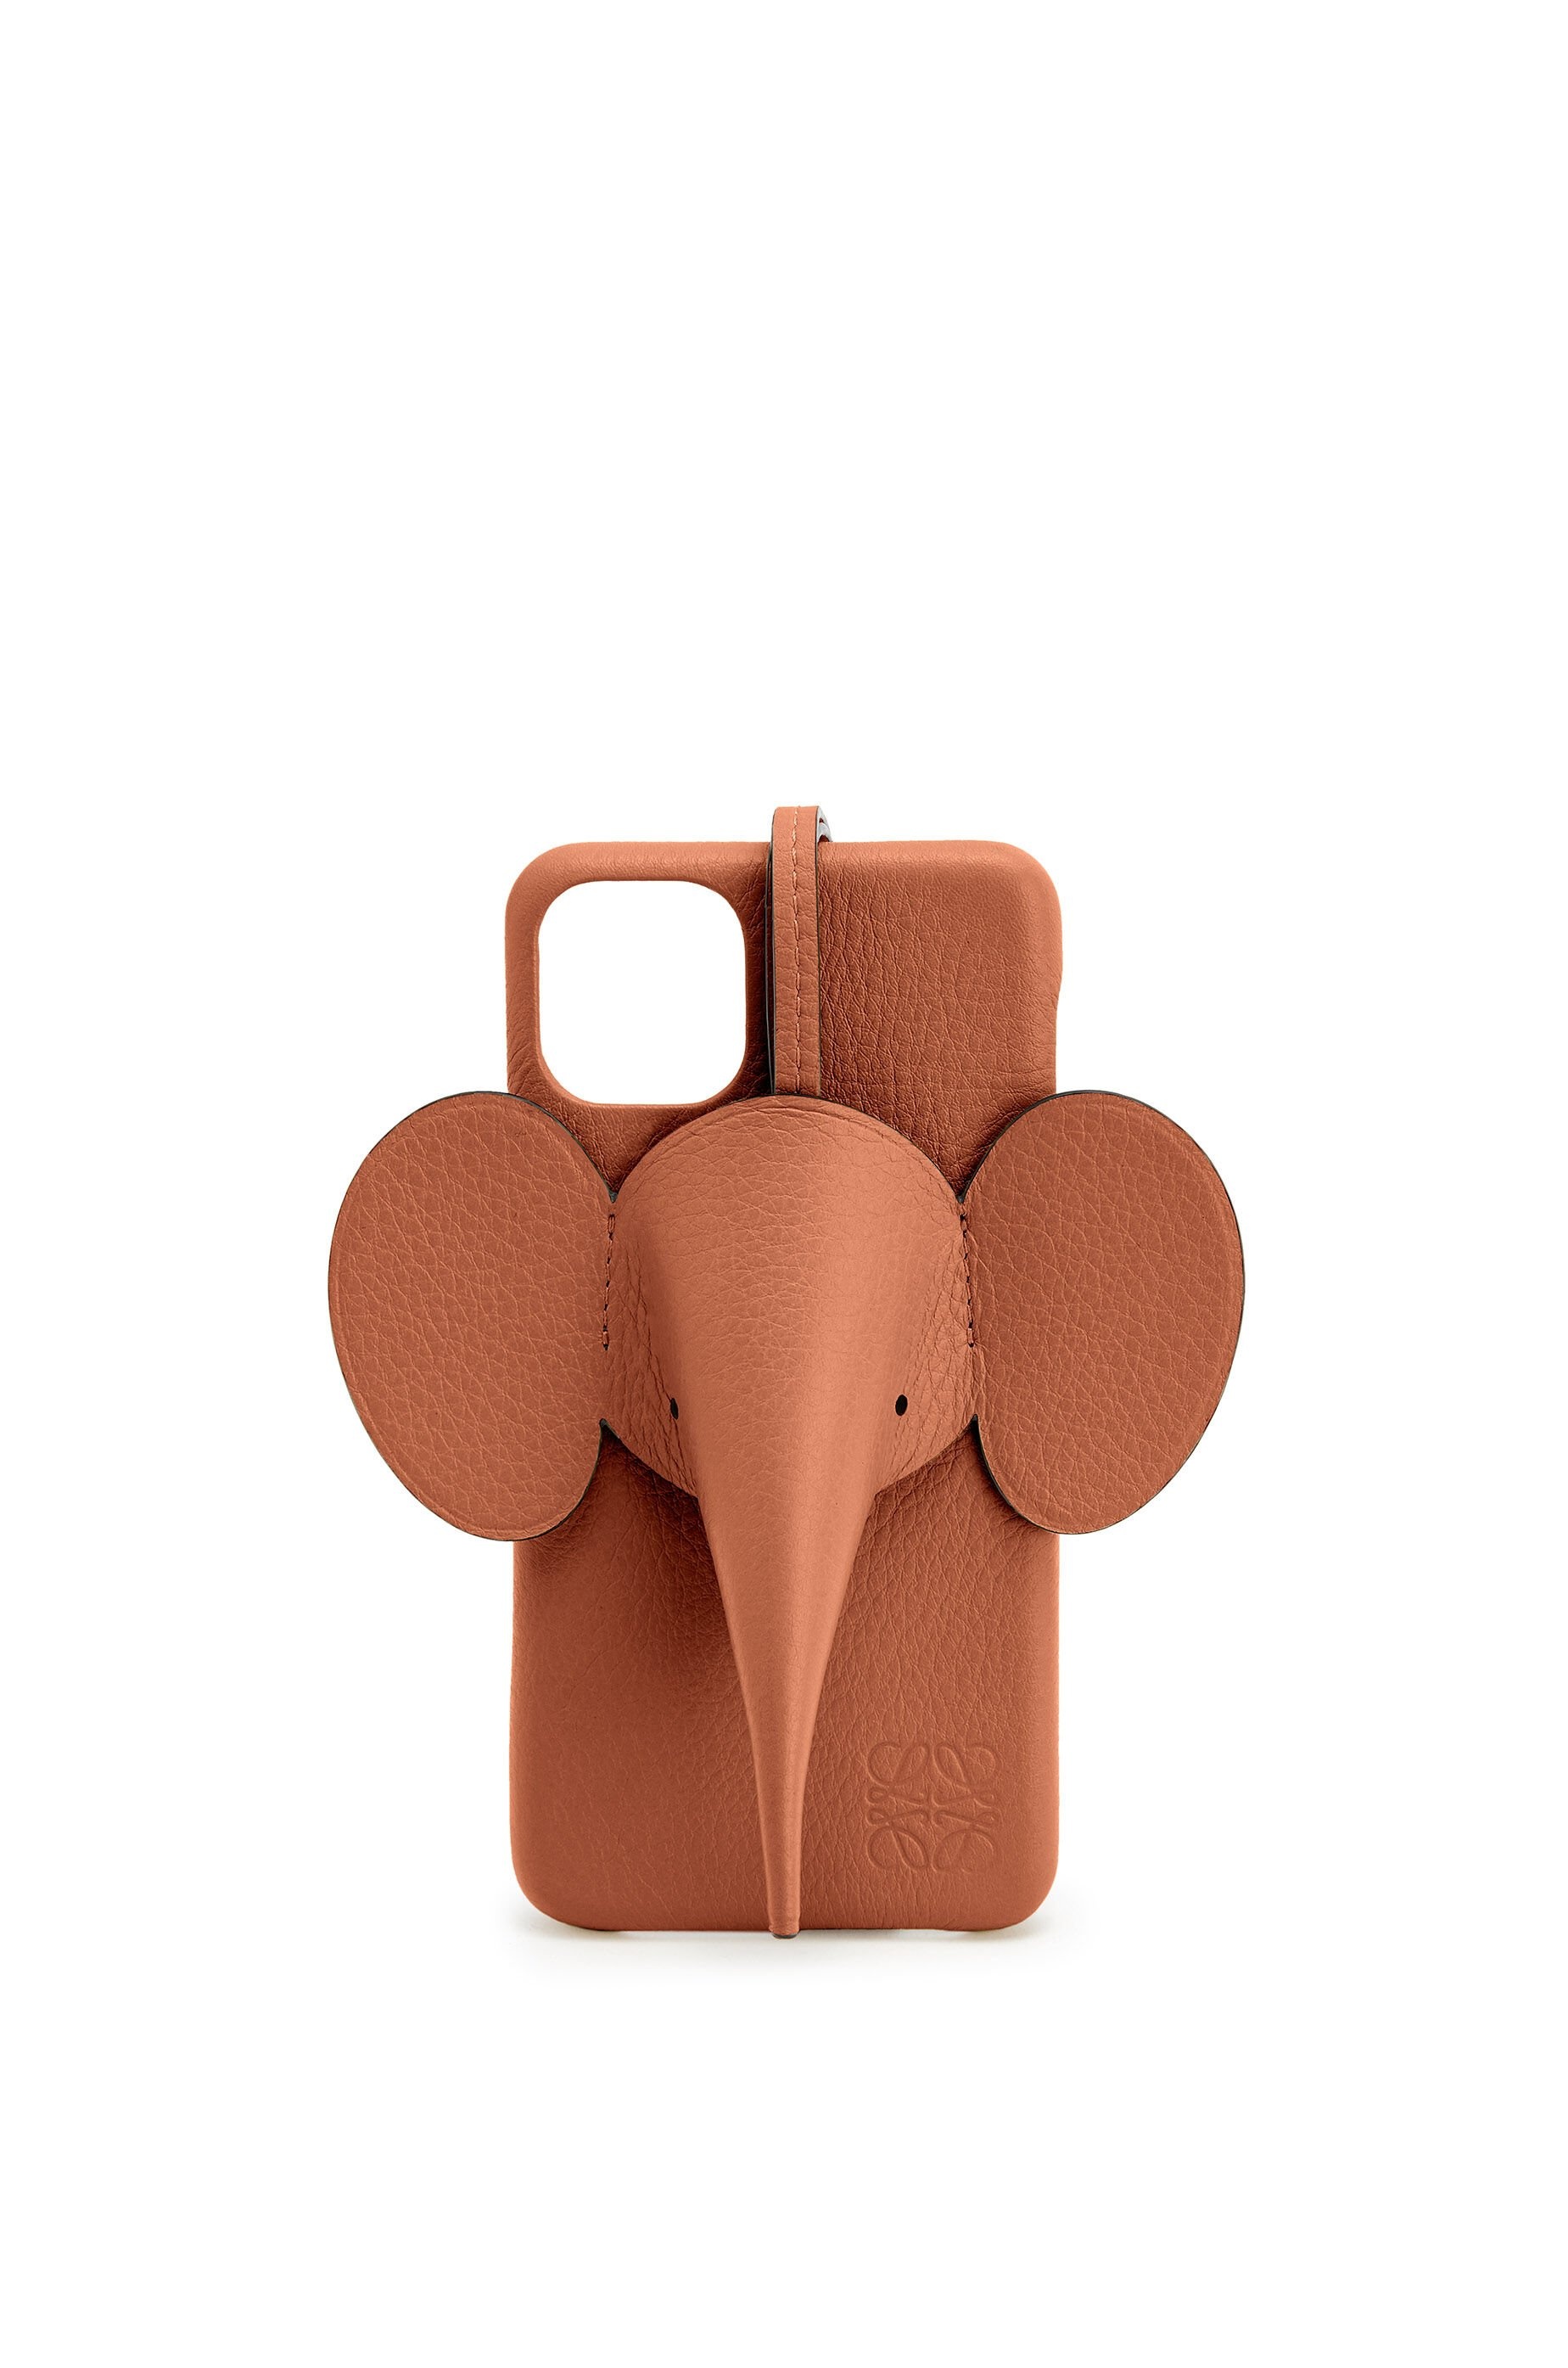 Elephant cover for iPhone 11 Pro Max in classic calfskin - 1